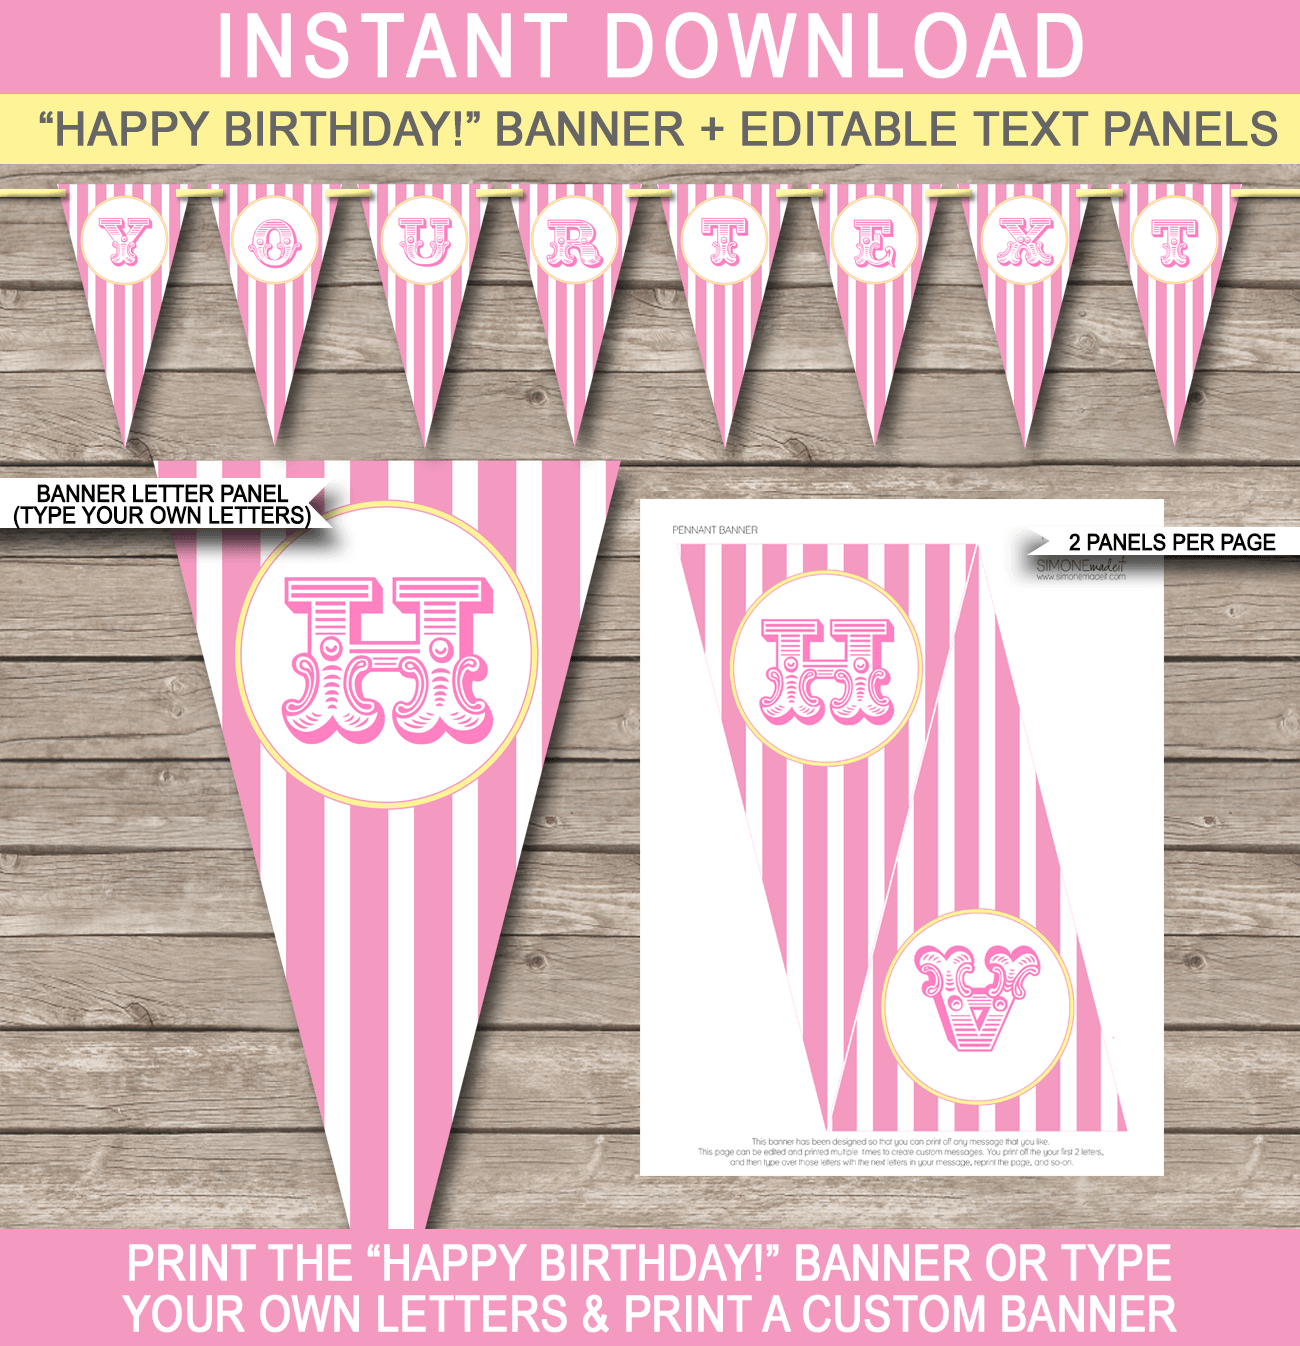 Pink Yellow Carnival Banner Template - Carnival Bunting - Circus - Happy Birthday Banner - Birthday Party - Editable and Printable DIY Template - INSTANT DOWNLOAD $4.50 via simonemadeit.com